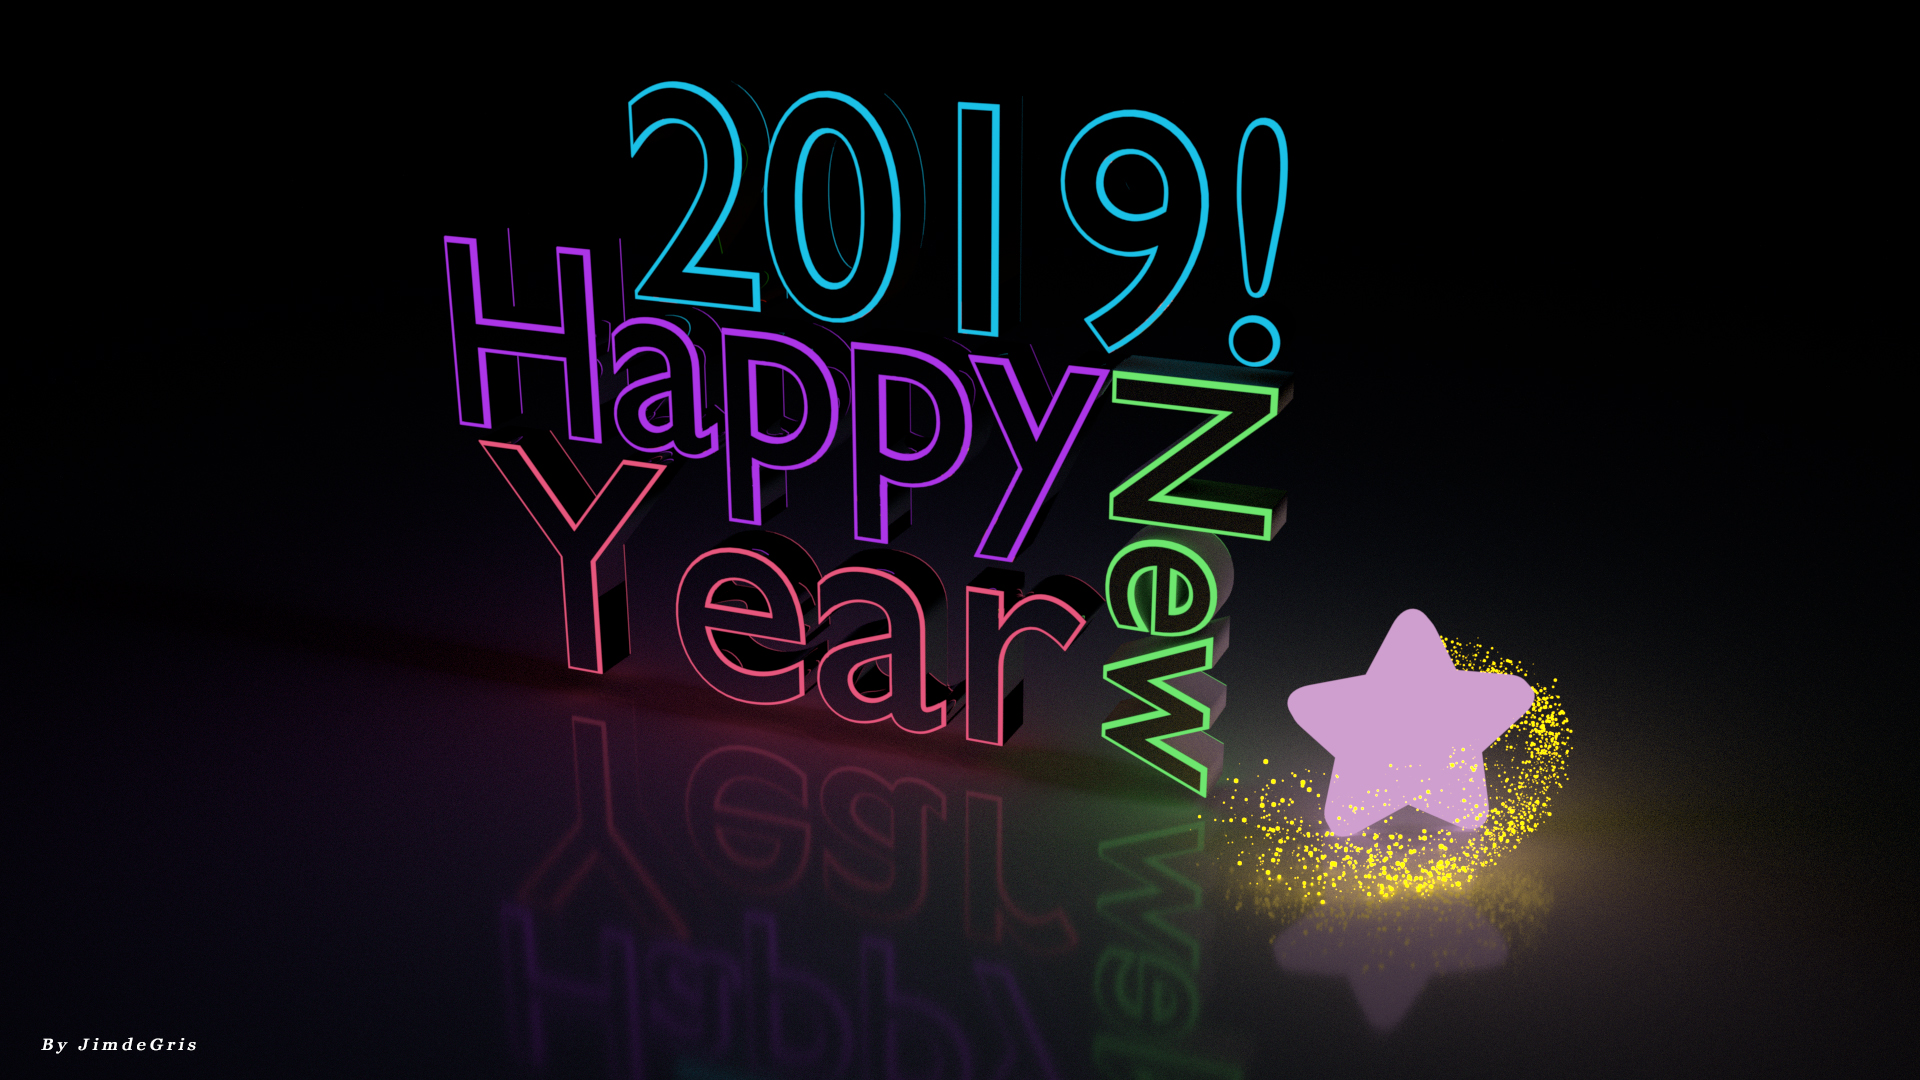 General 1920x1080 New Year 2019 (year) holiday